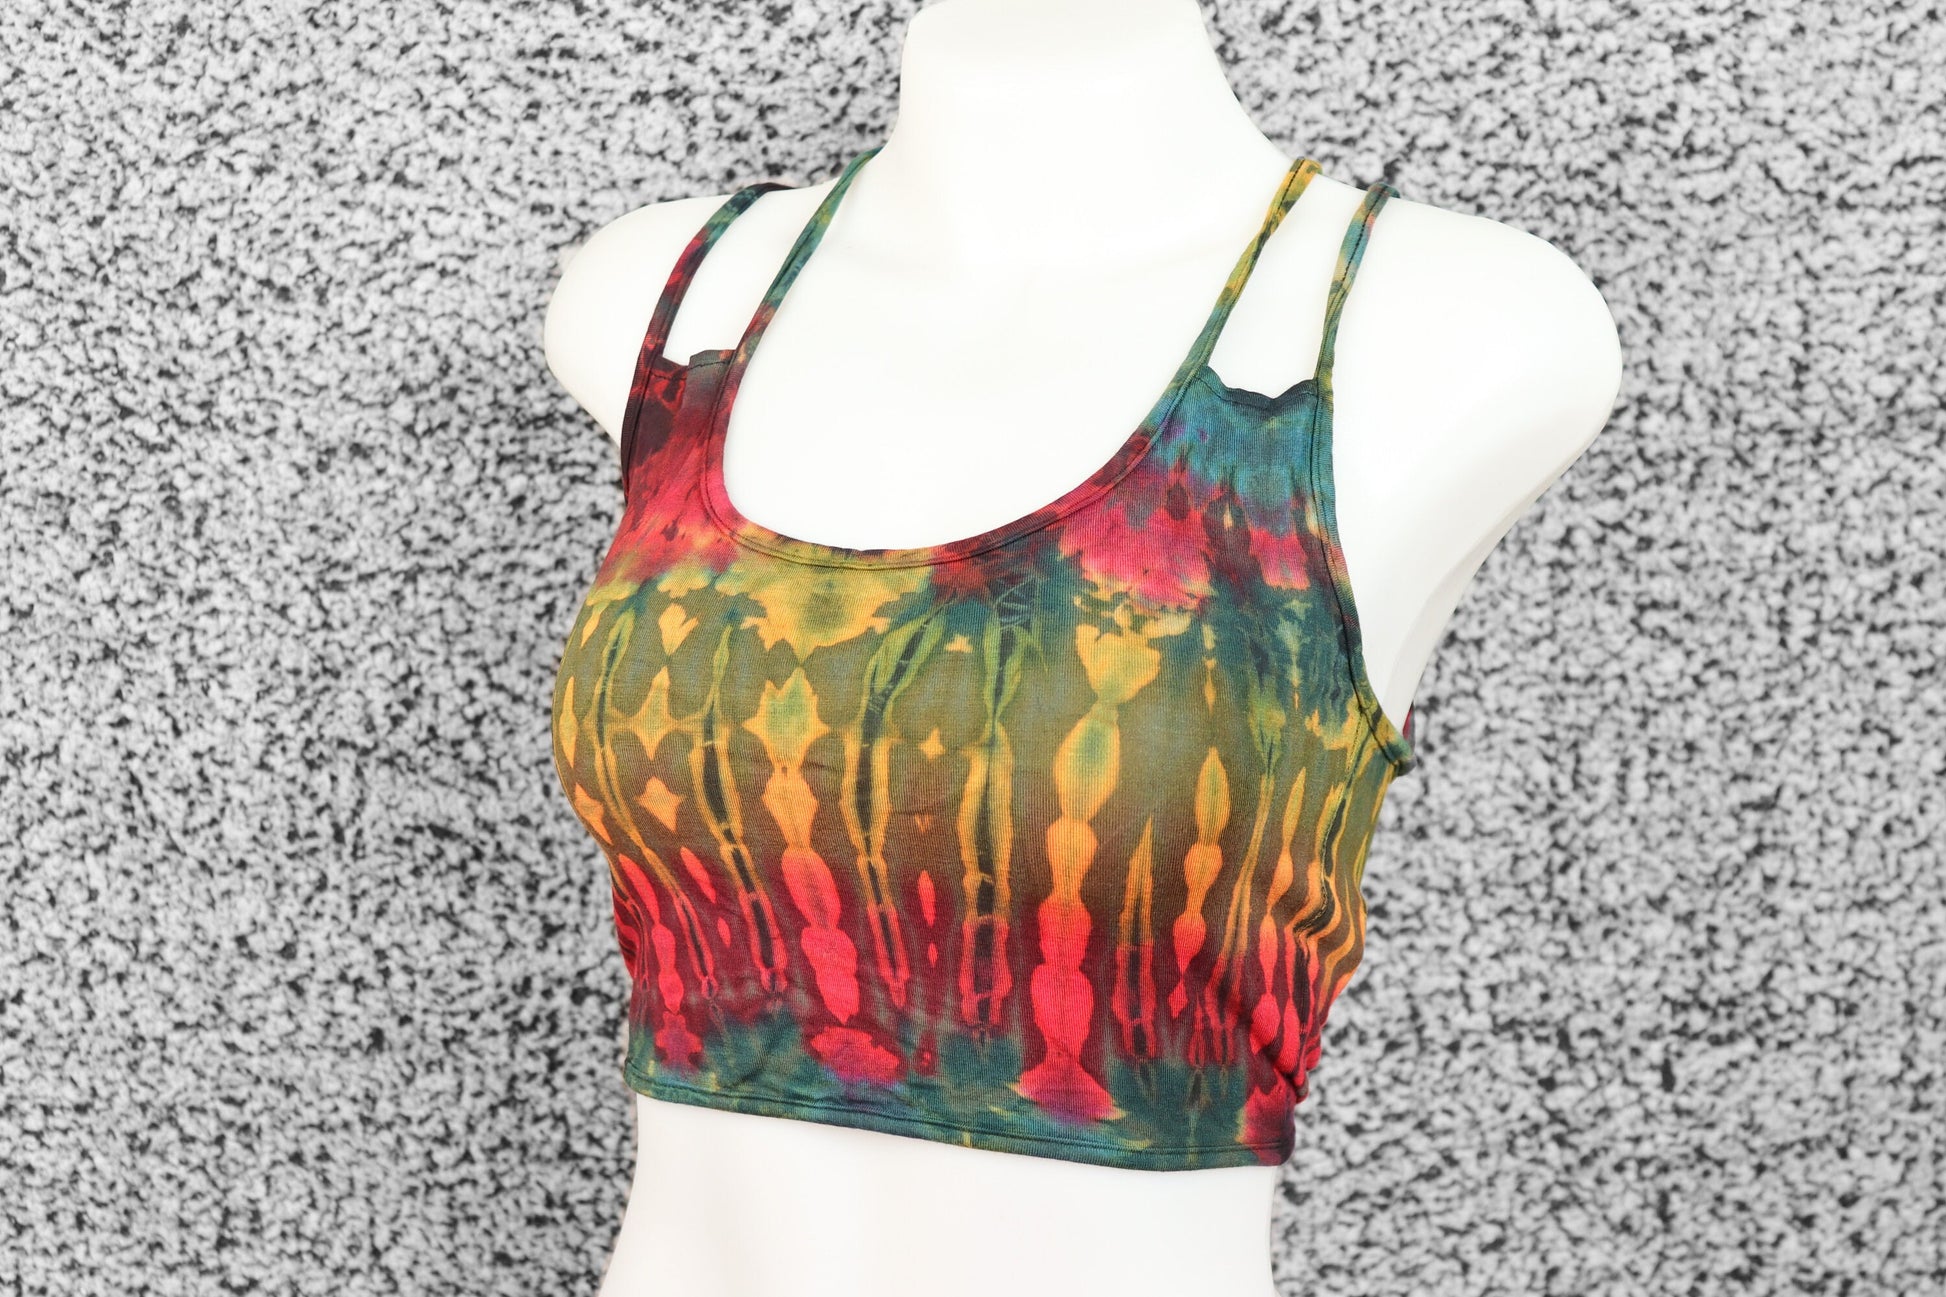 Tie-Dye Cross Back Crop Top - Moss Green Red and Yellow - Bare Canvas